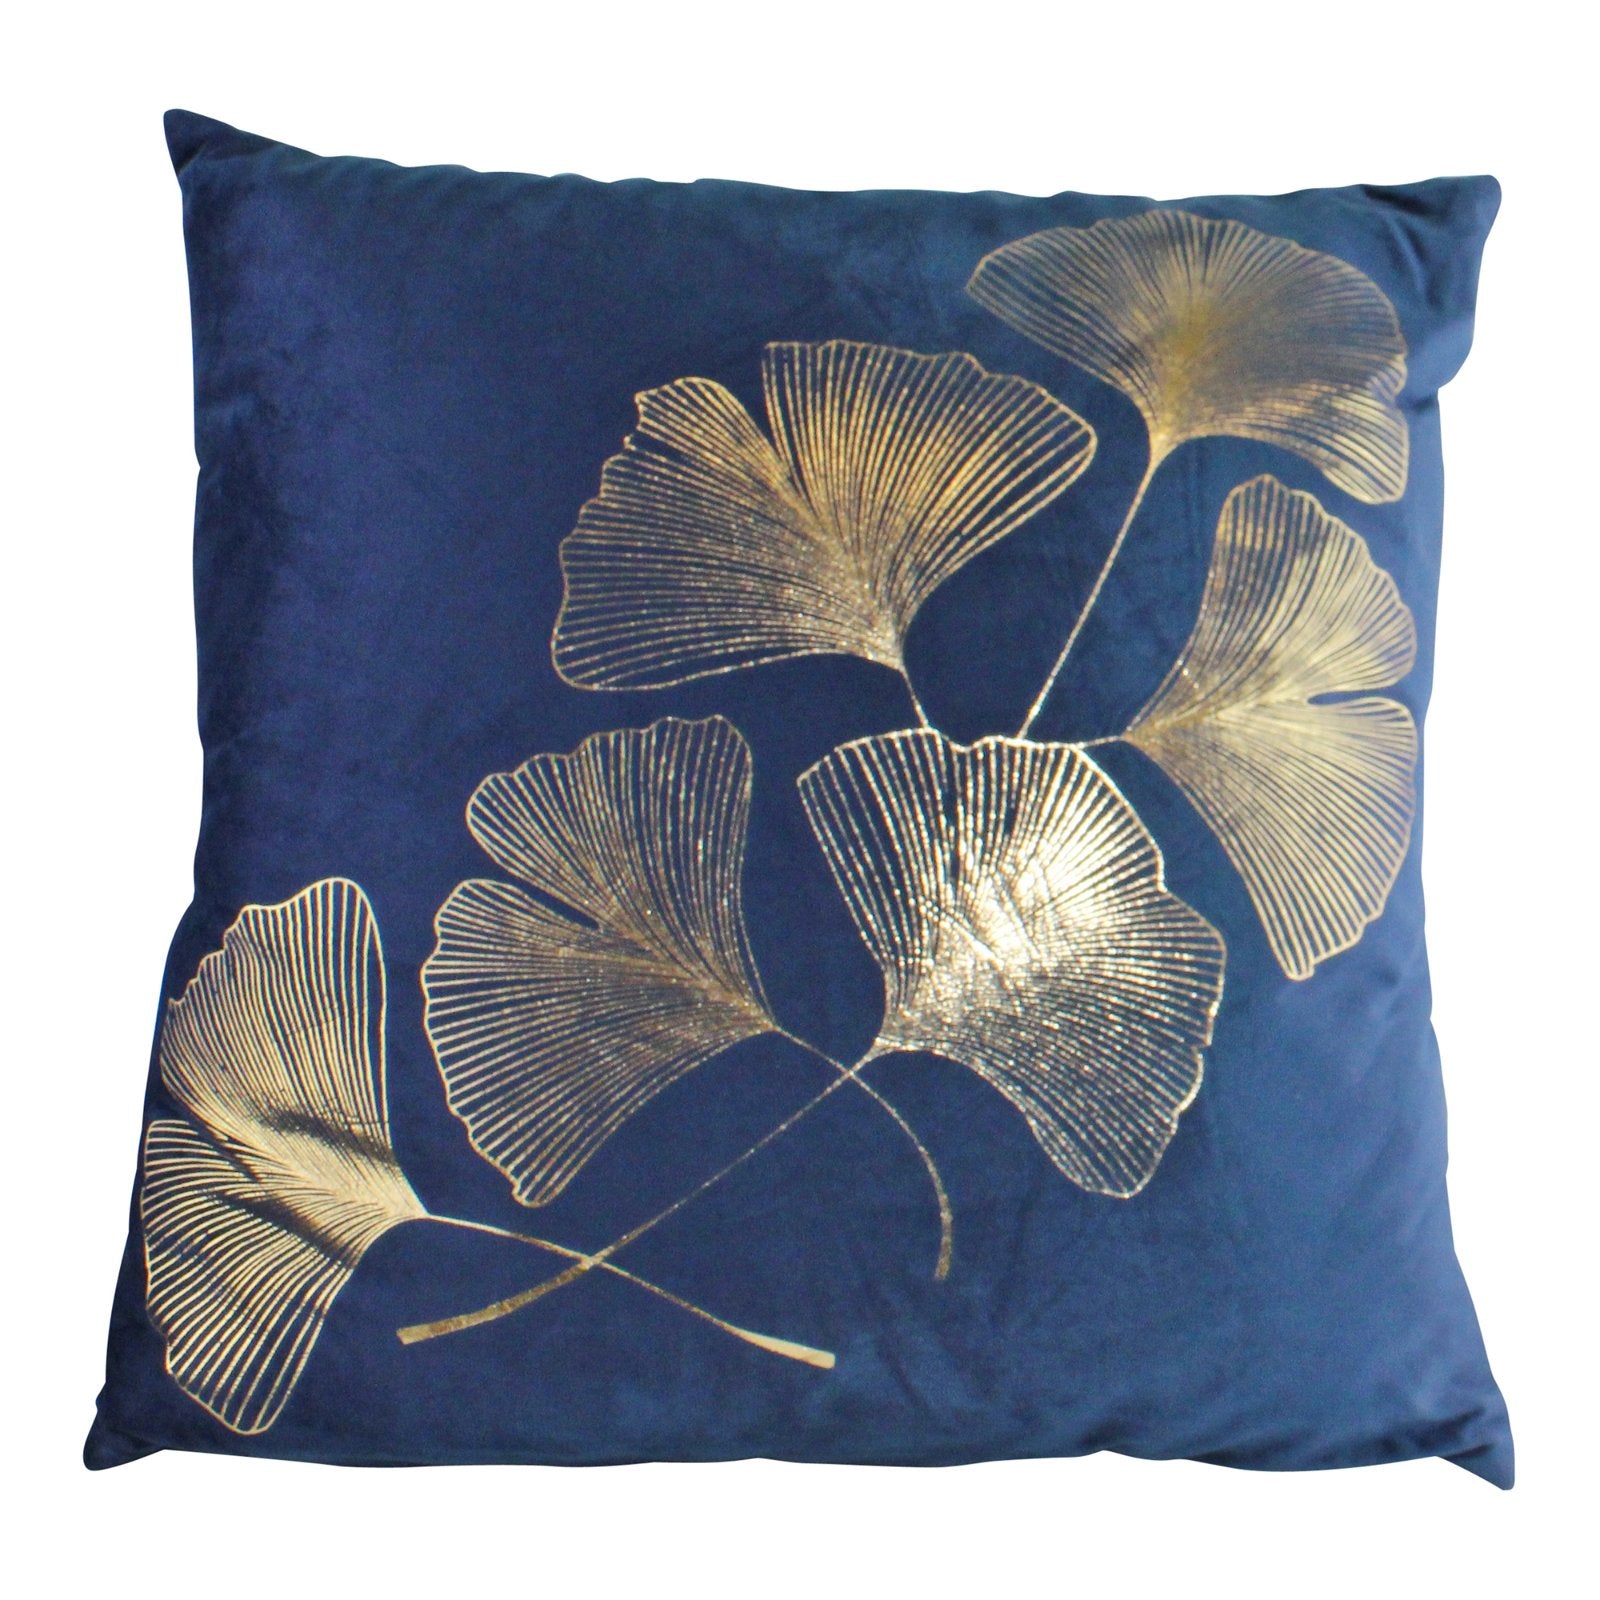 Scatter Cushion With Gold Lotus Leaf Design In Blue